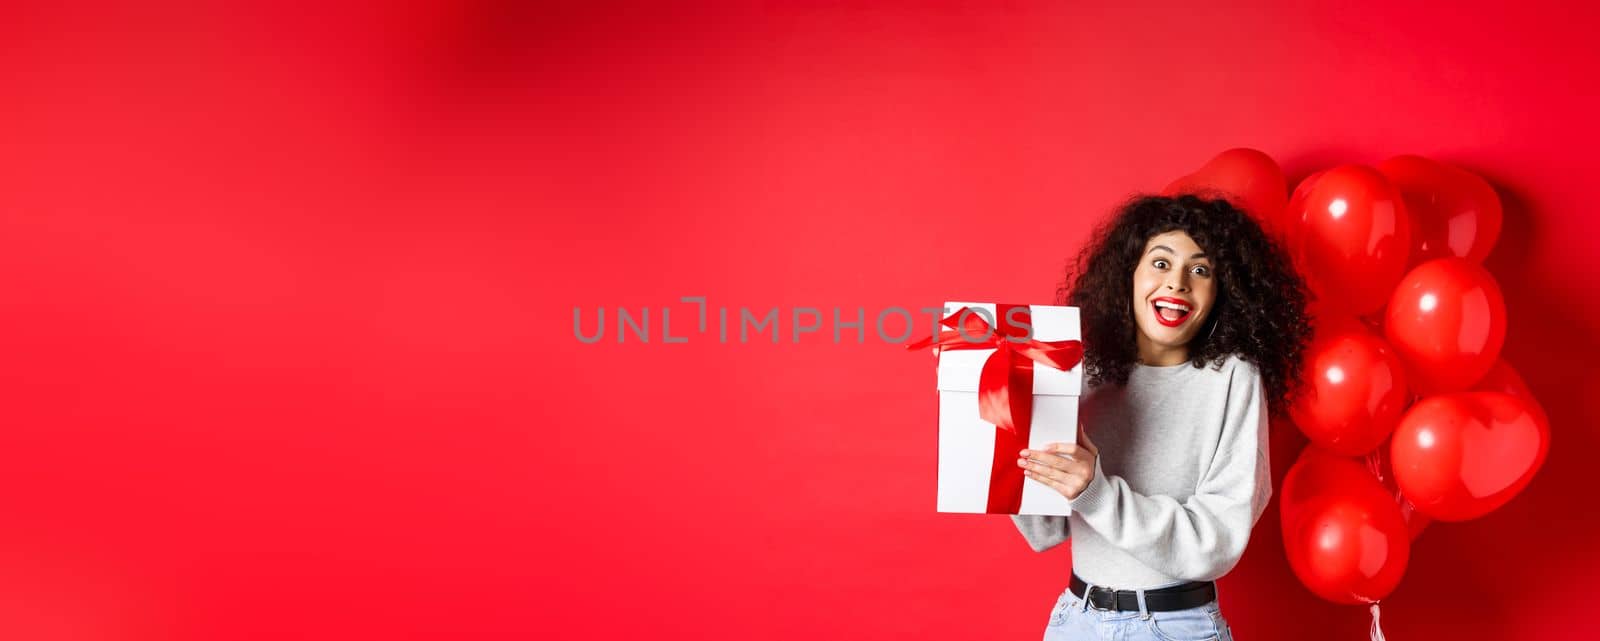 Surprised and happy woman holding valentines day gift from lover, standing near romantic hearts balloons and looking at camera amazed, red background.